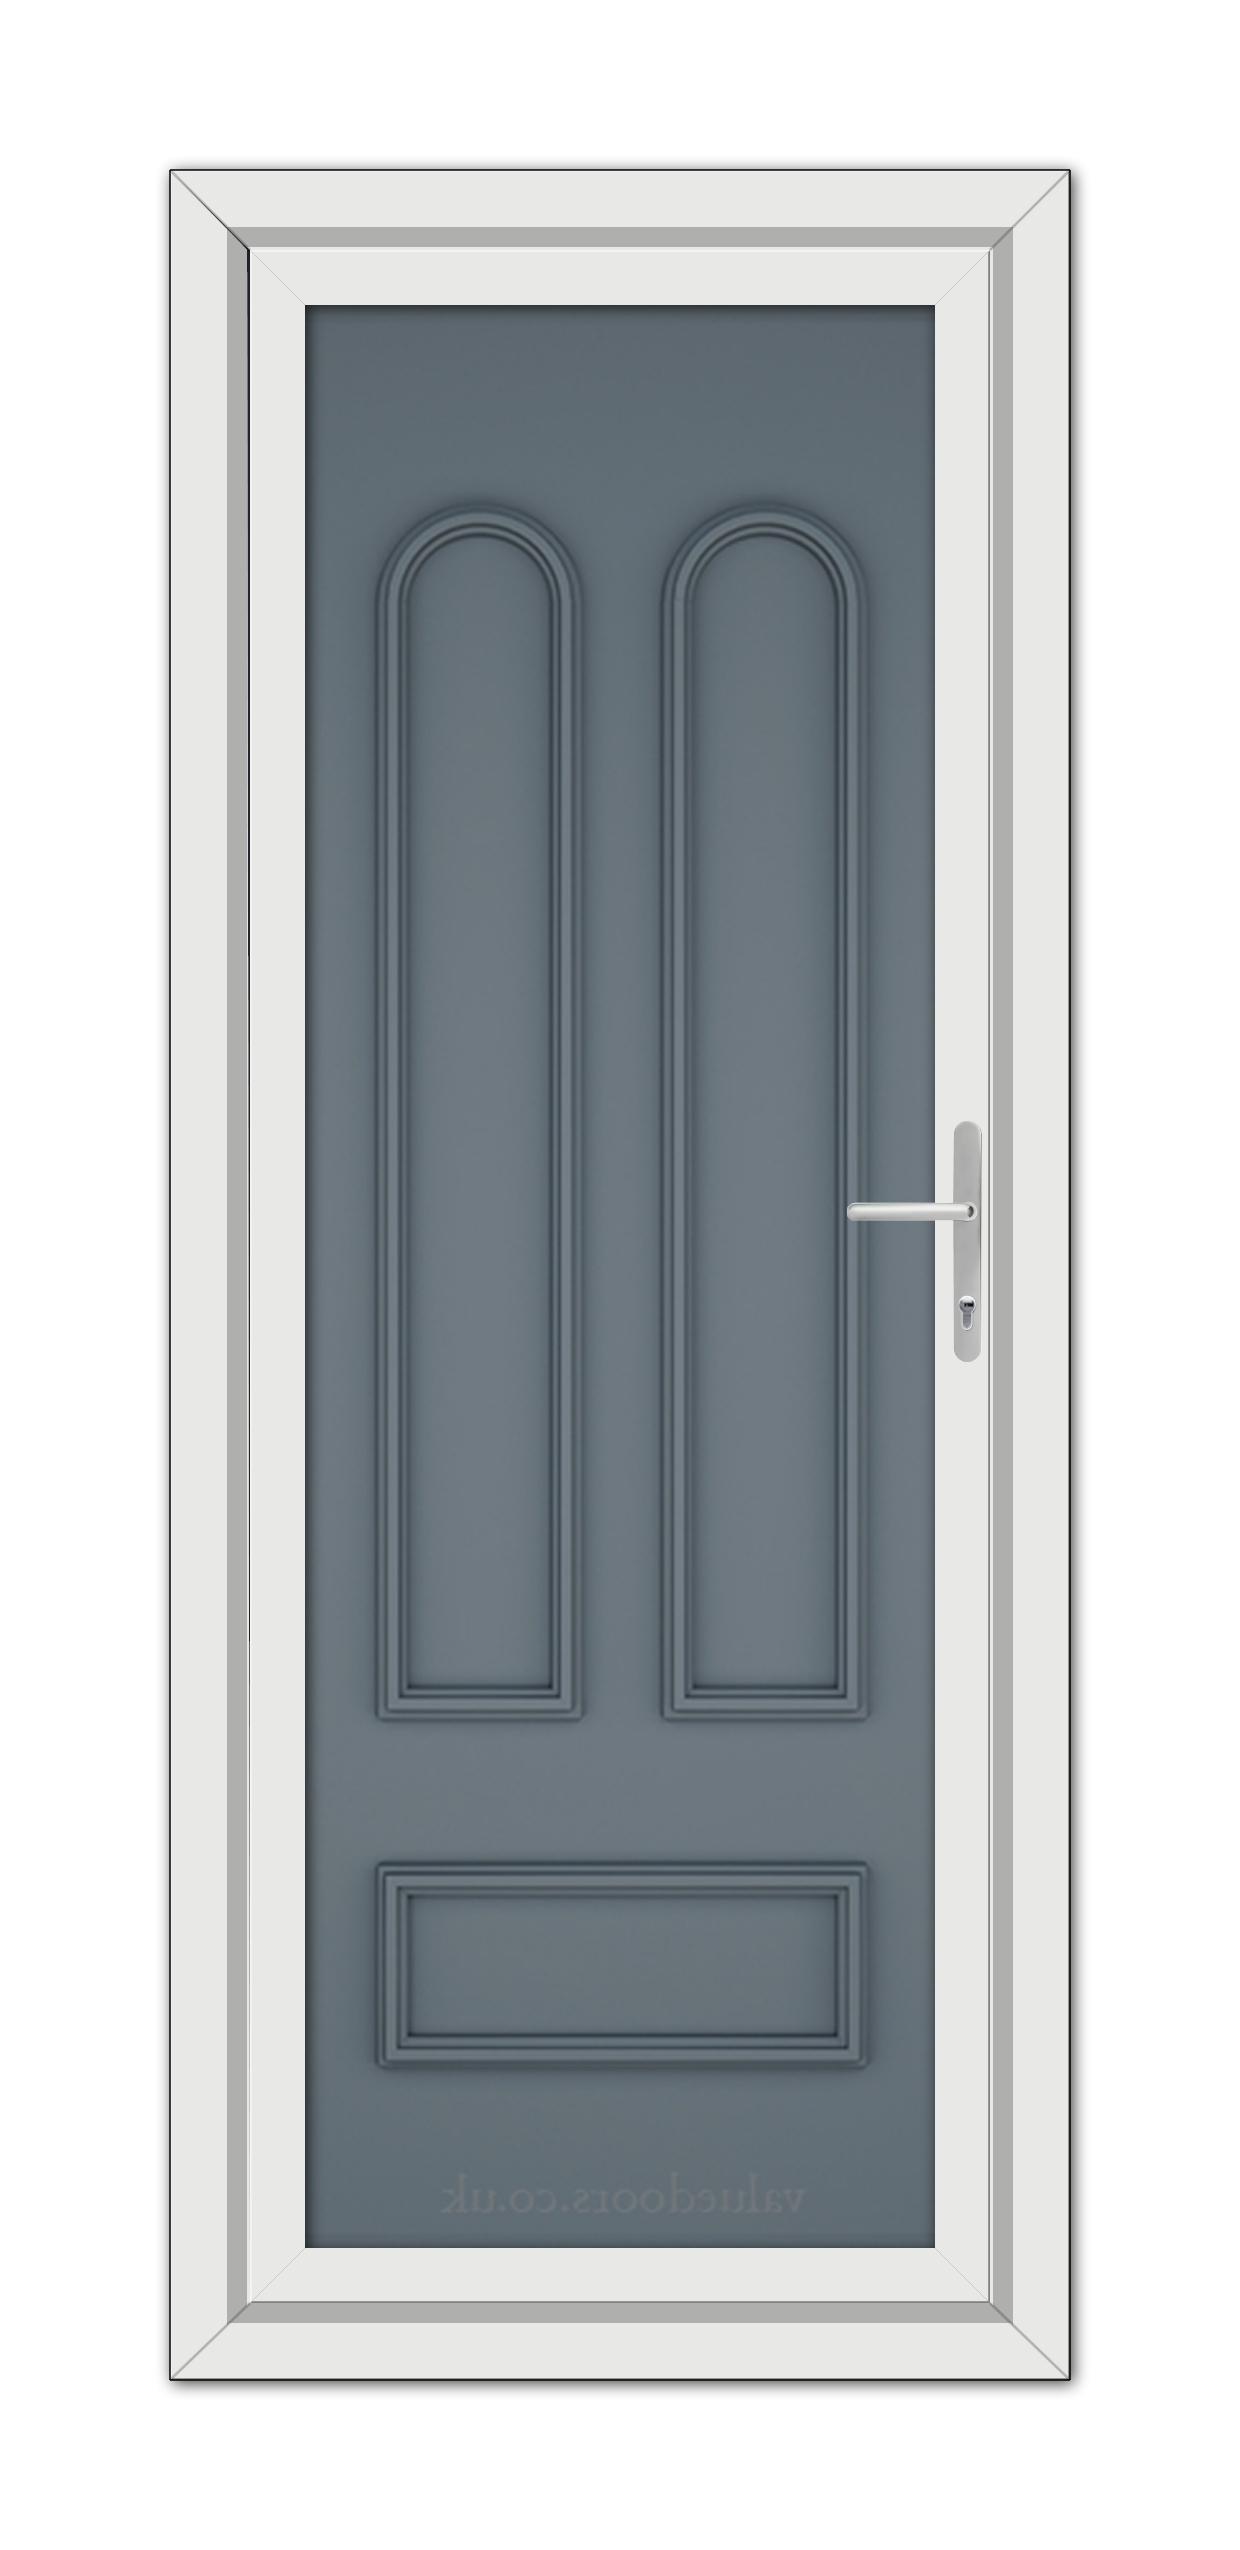 A Slate Grey Madrid Solid uPVC Door with a white frame.